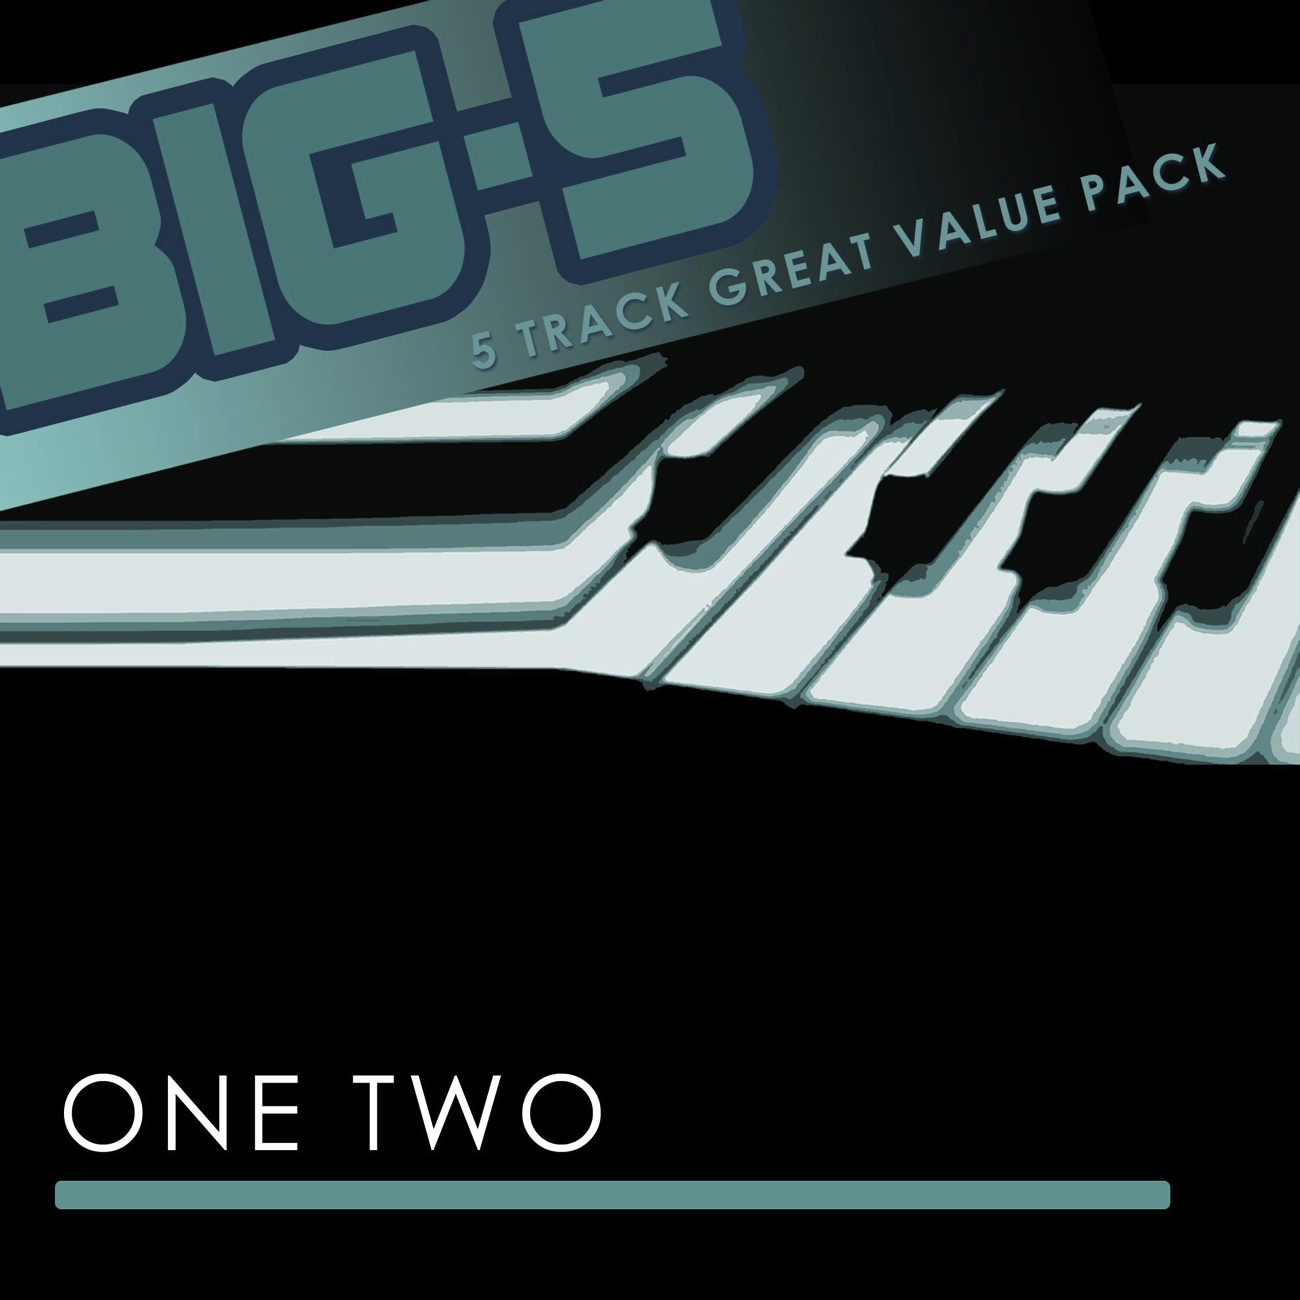 Big-5: One Two